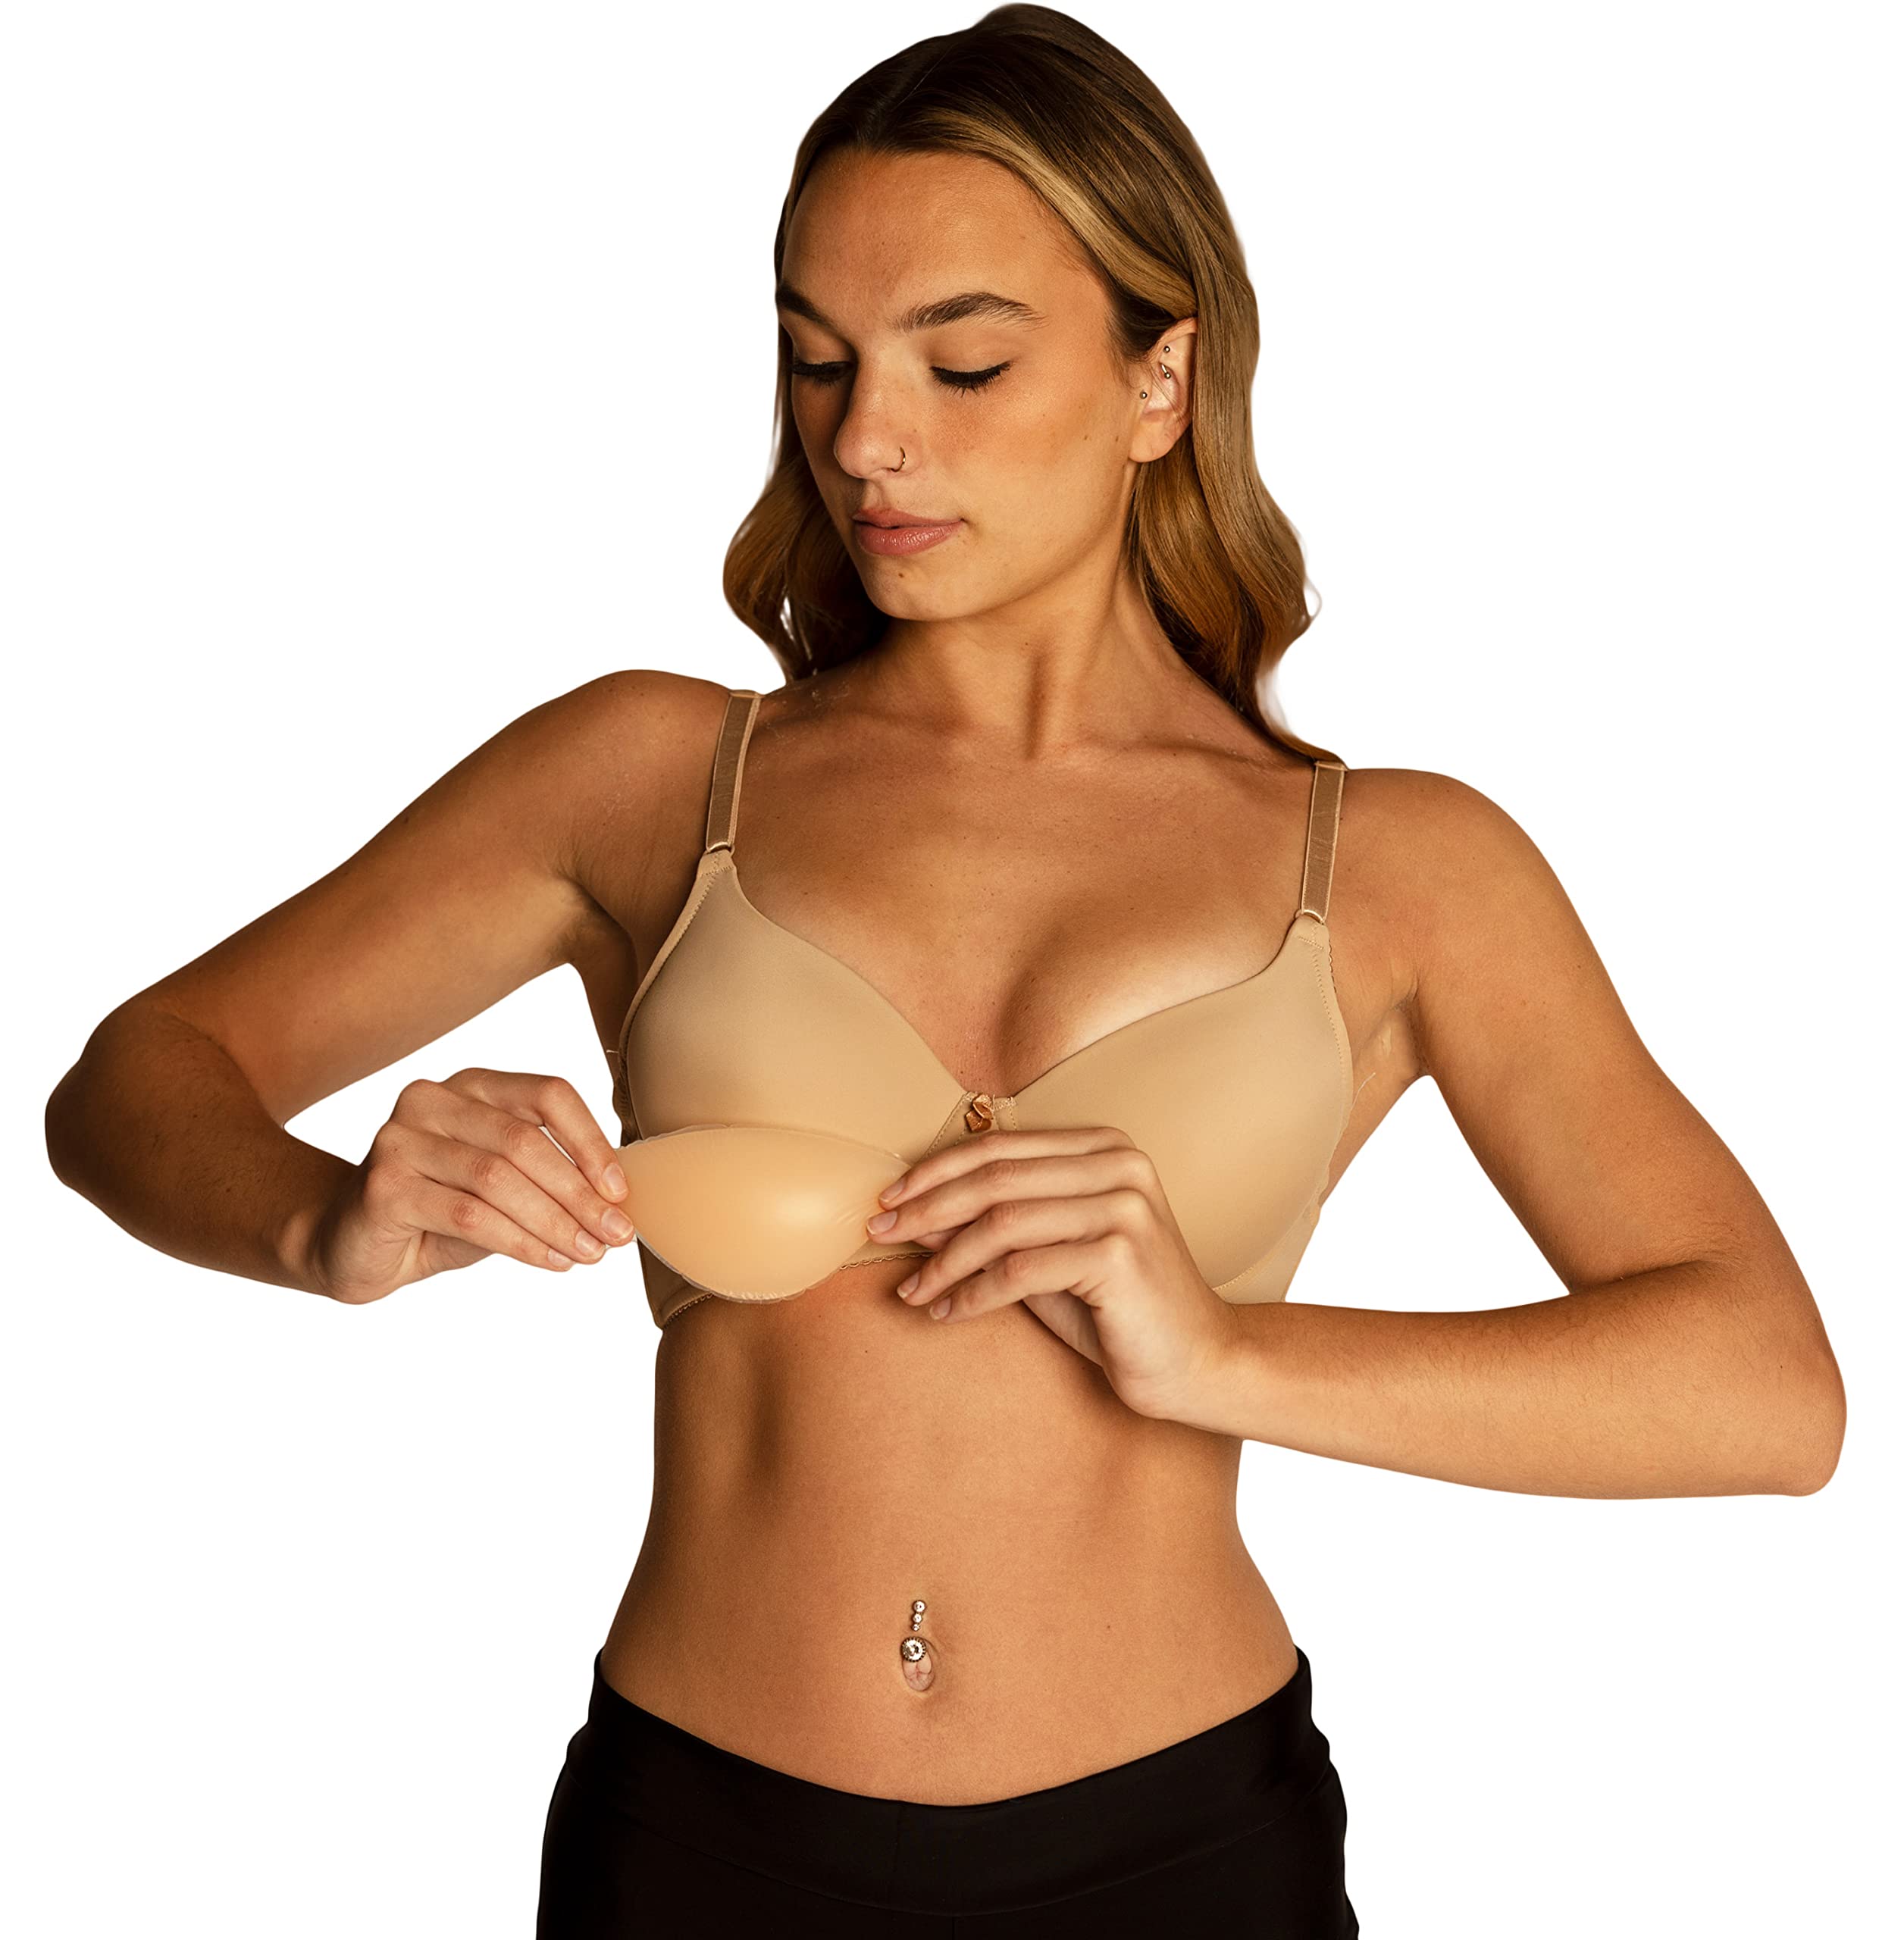 Silicone Cleavage Enhancer Breast Pushup Pad Bra Insert S Size